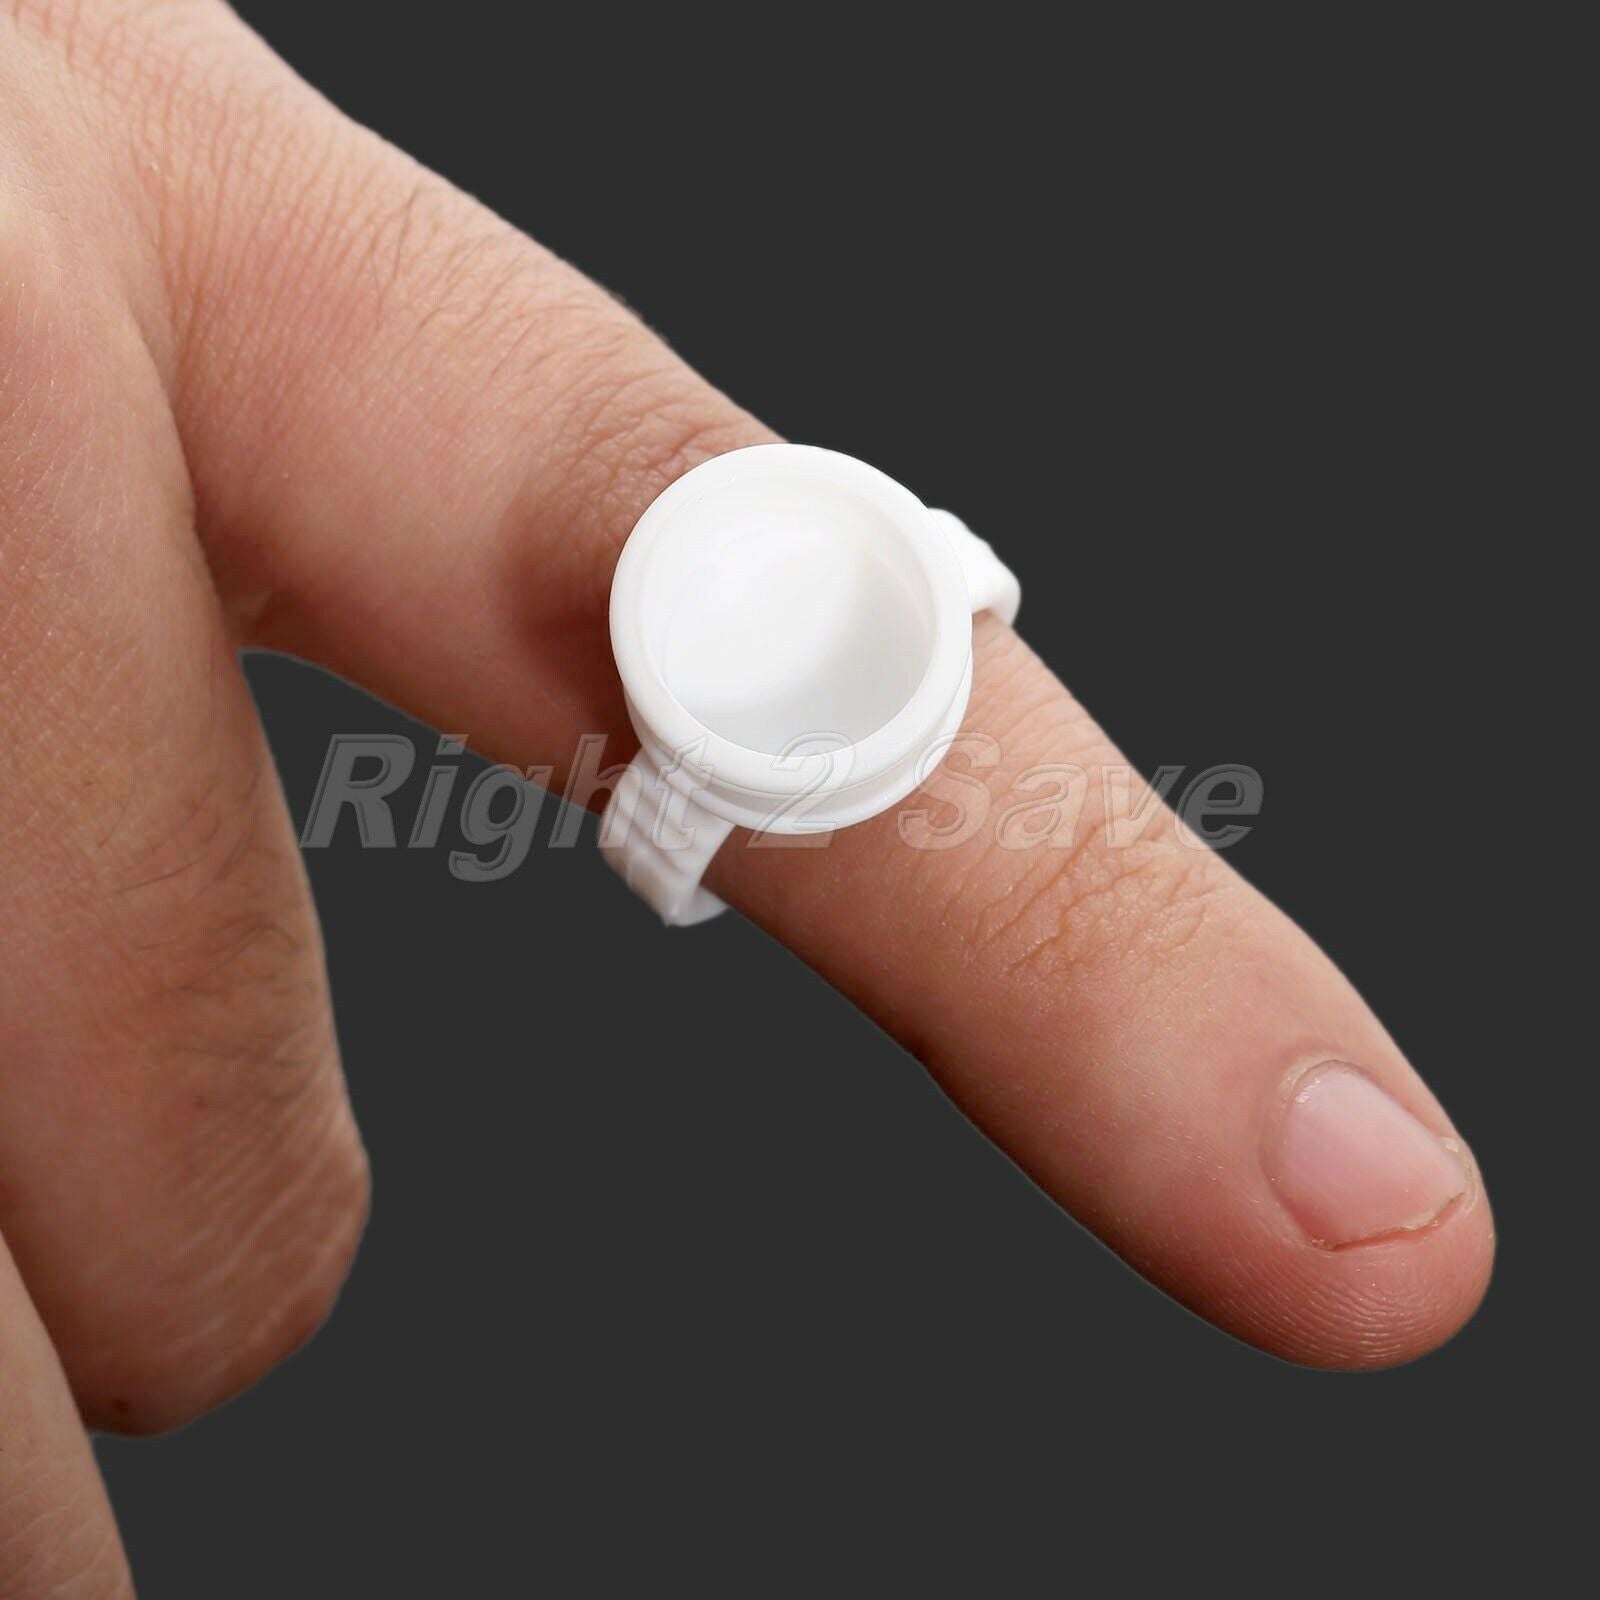 50pcs White Plastic Disposable Tattoo Ink Holder Cups Medium For Tattoo Makeup